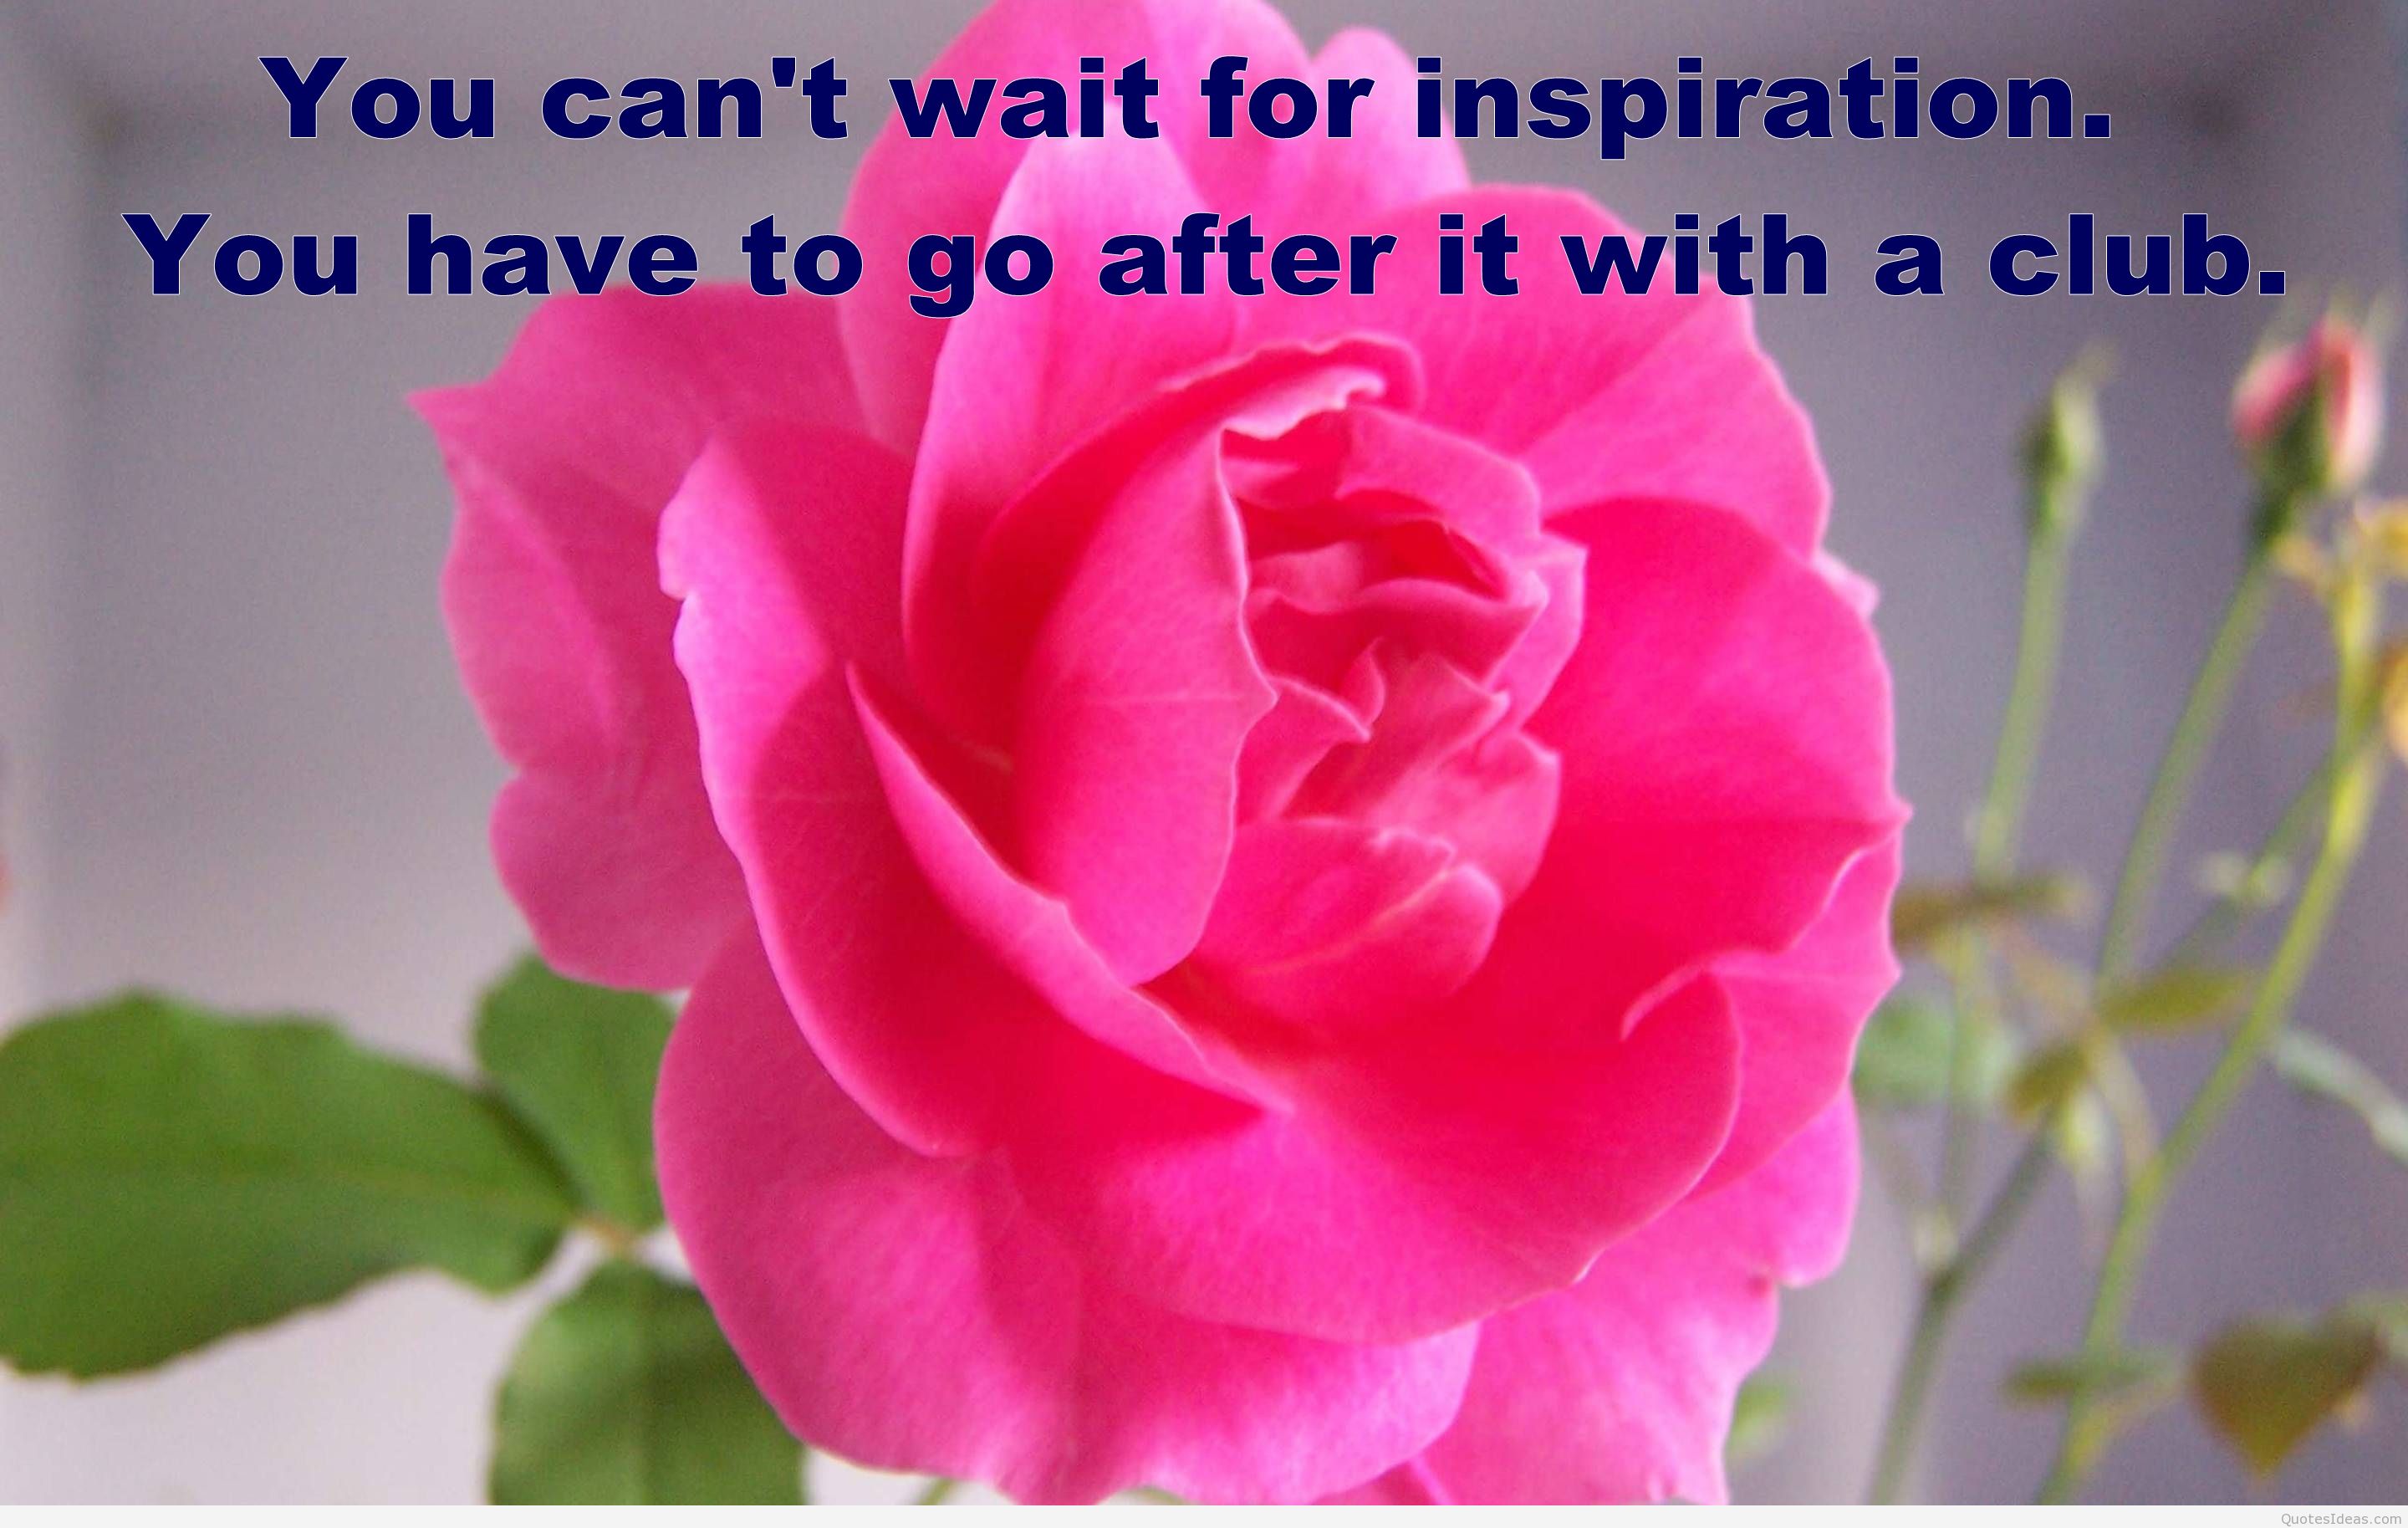 flowers wallpapers with quotes,petal,pink,flower,garden roses,rose